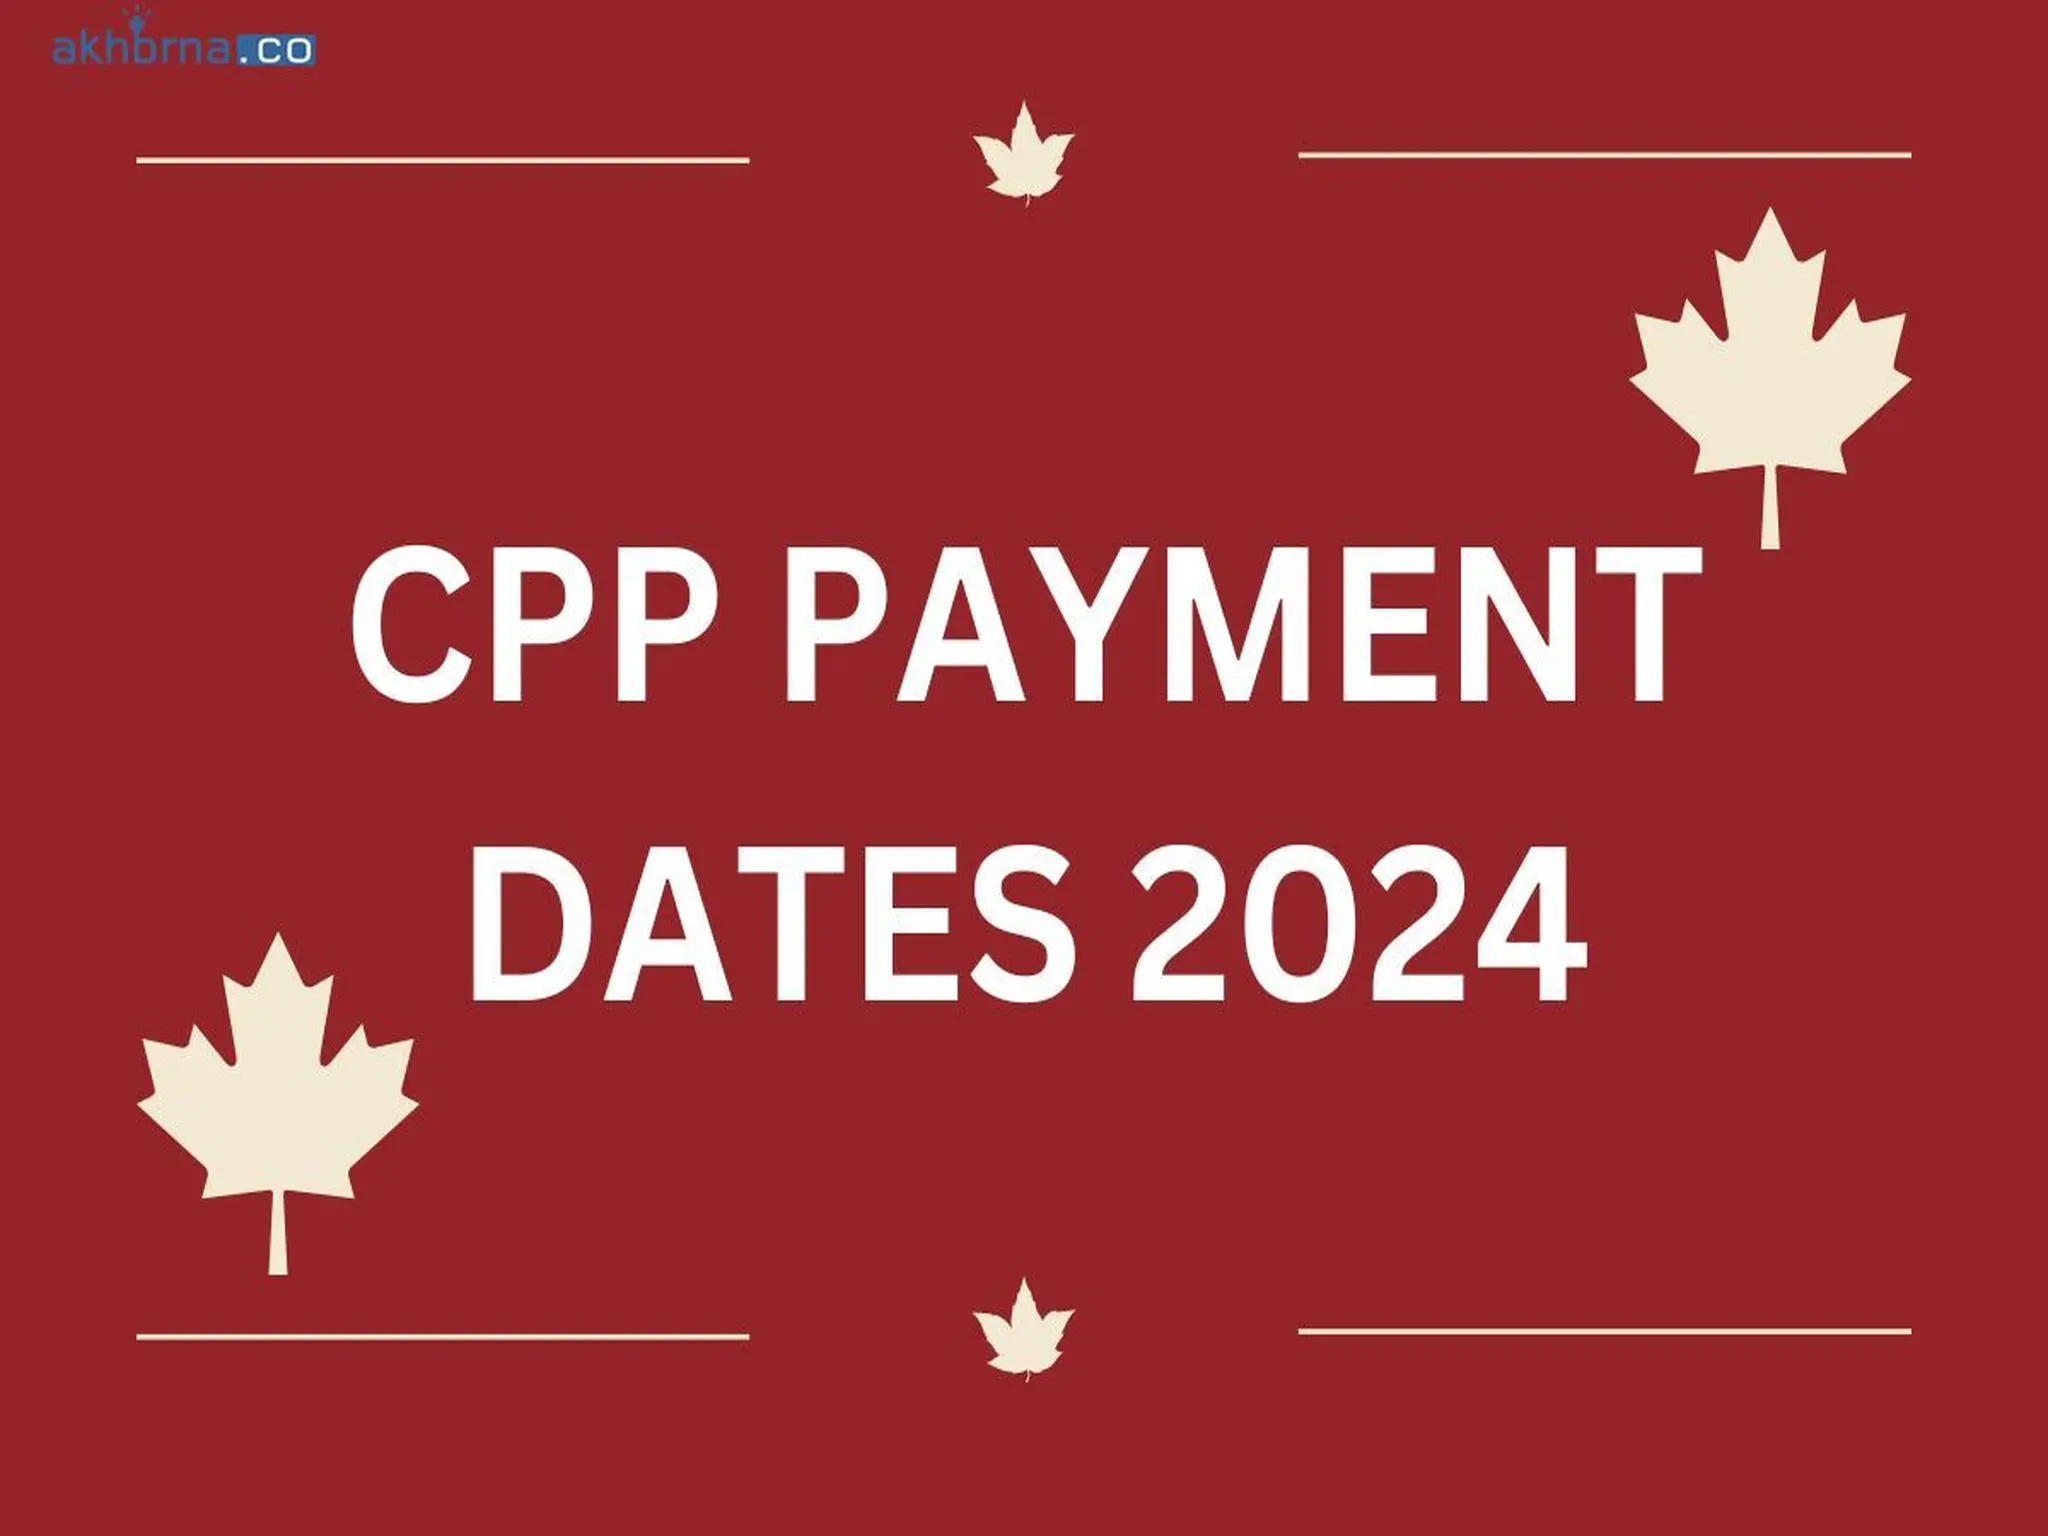 Canadian residents meeting criteria to receive up to $1,300 next week